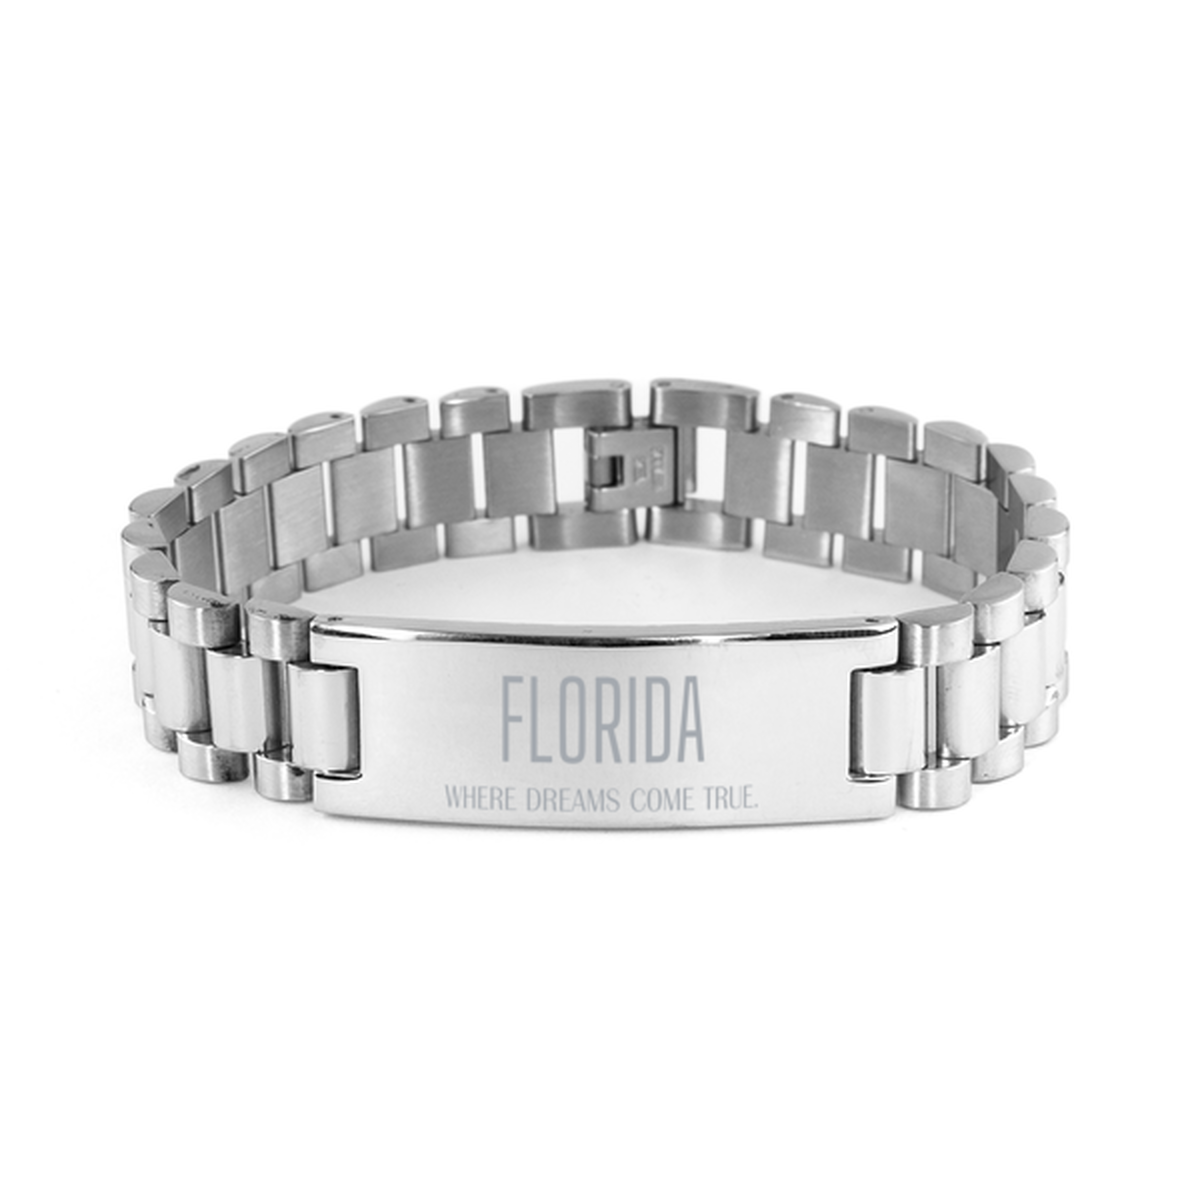 Love Florida State Ladder Stainless Steel Bracelet, Florida Where dreams come true, Birthday Inspirational Gifts For Florida Men, Women, Friends